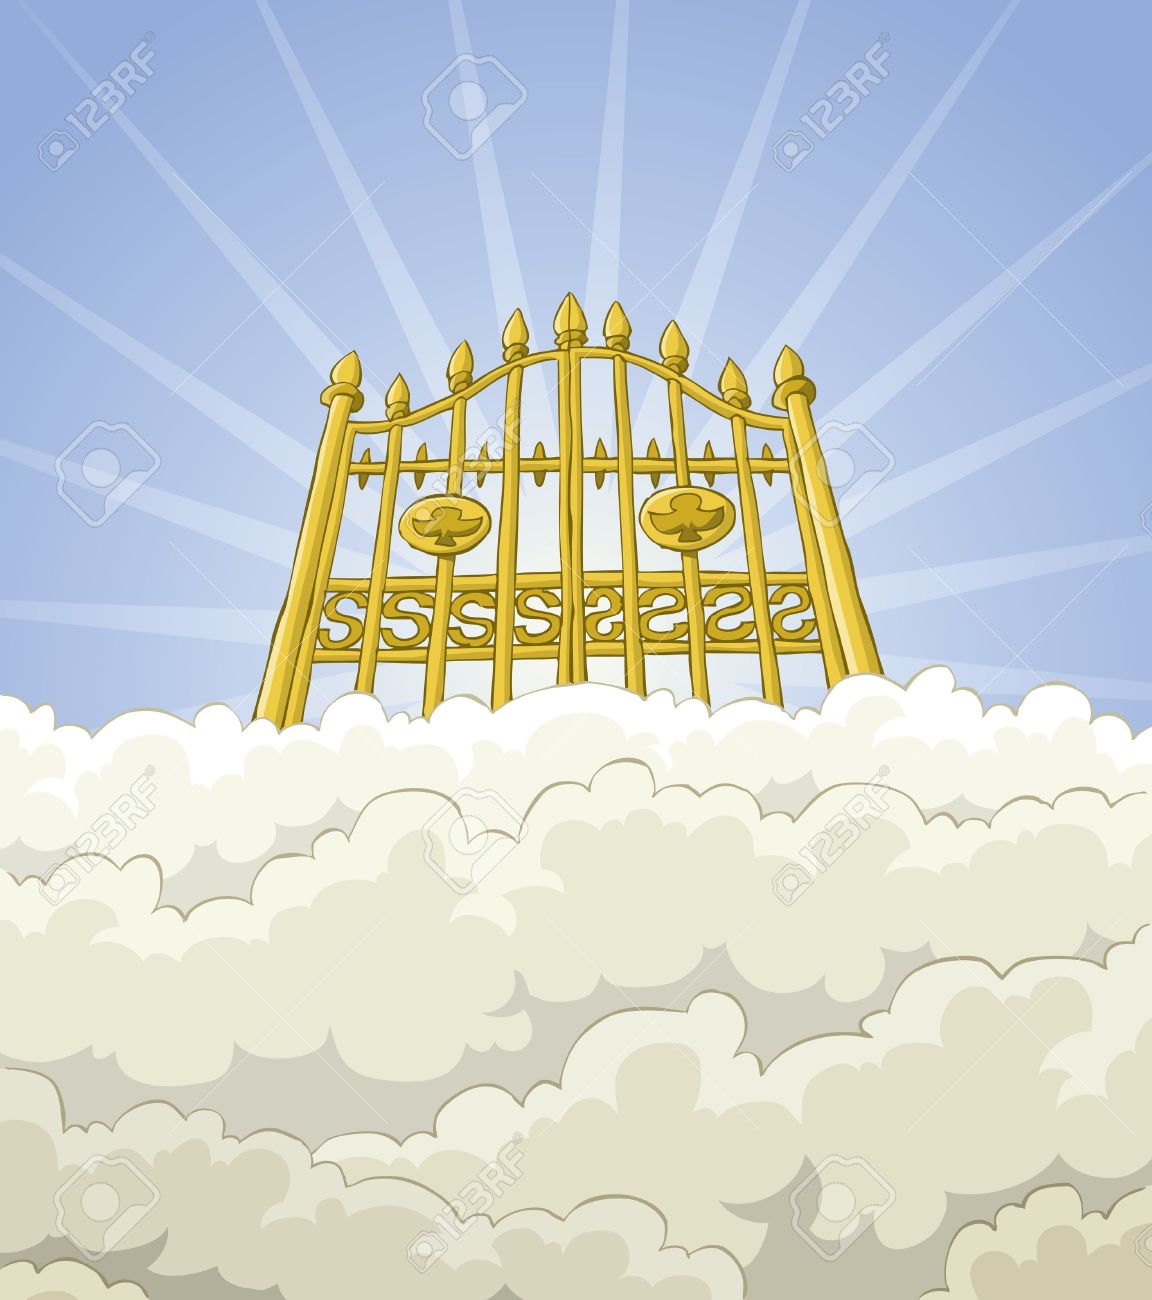 pearly gates clipart free - photo #39